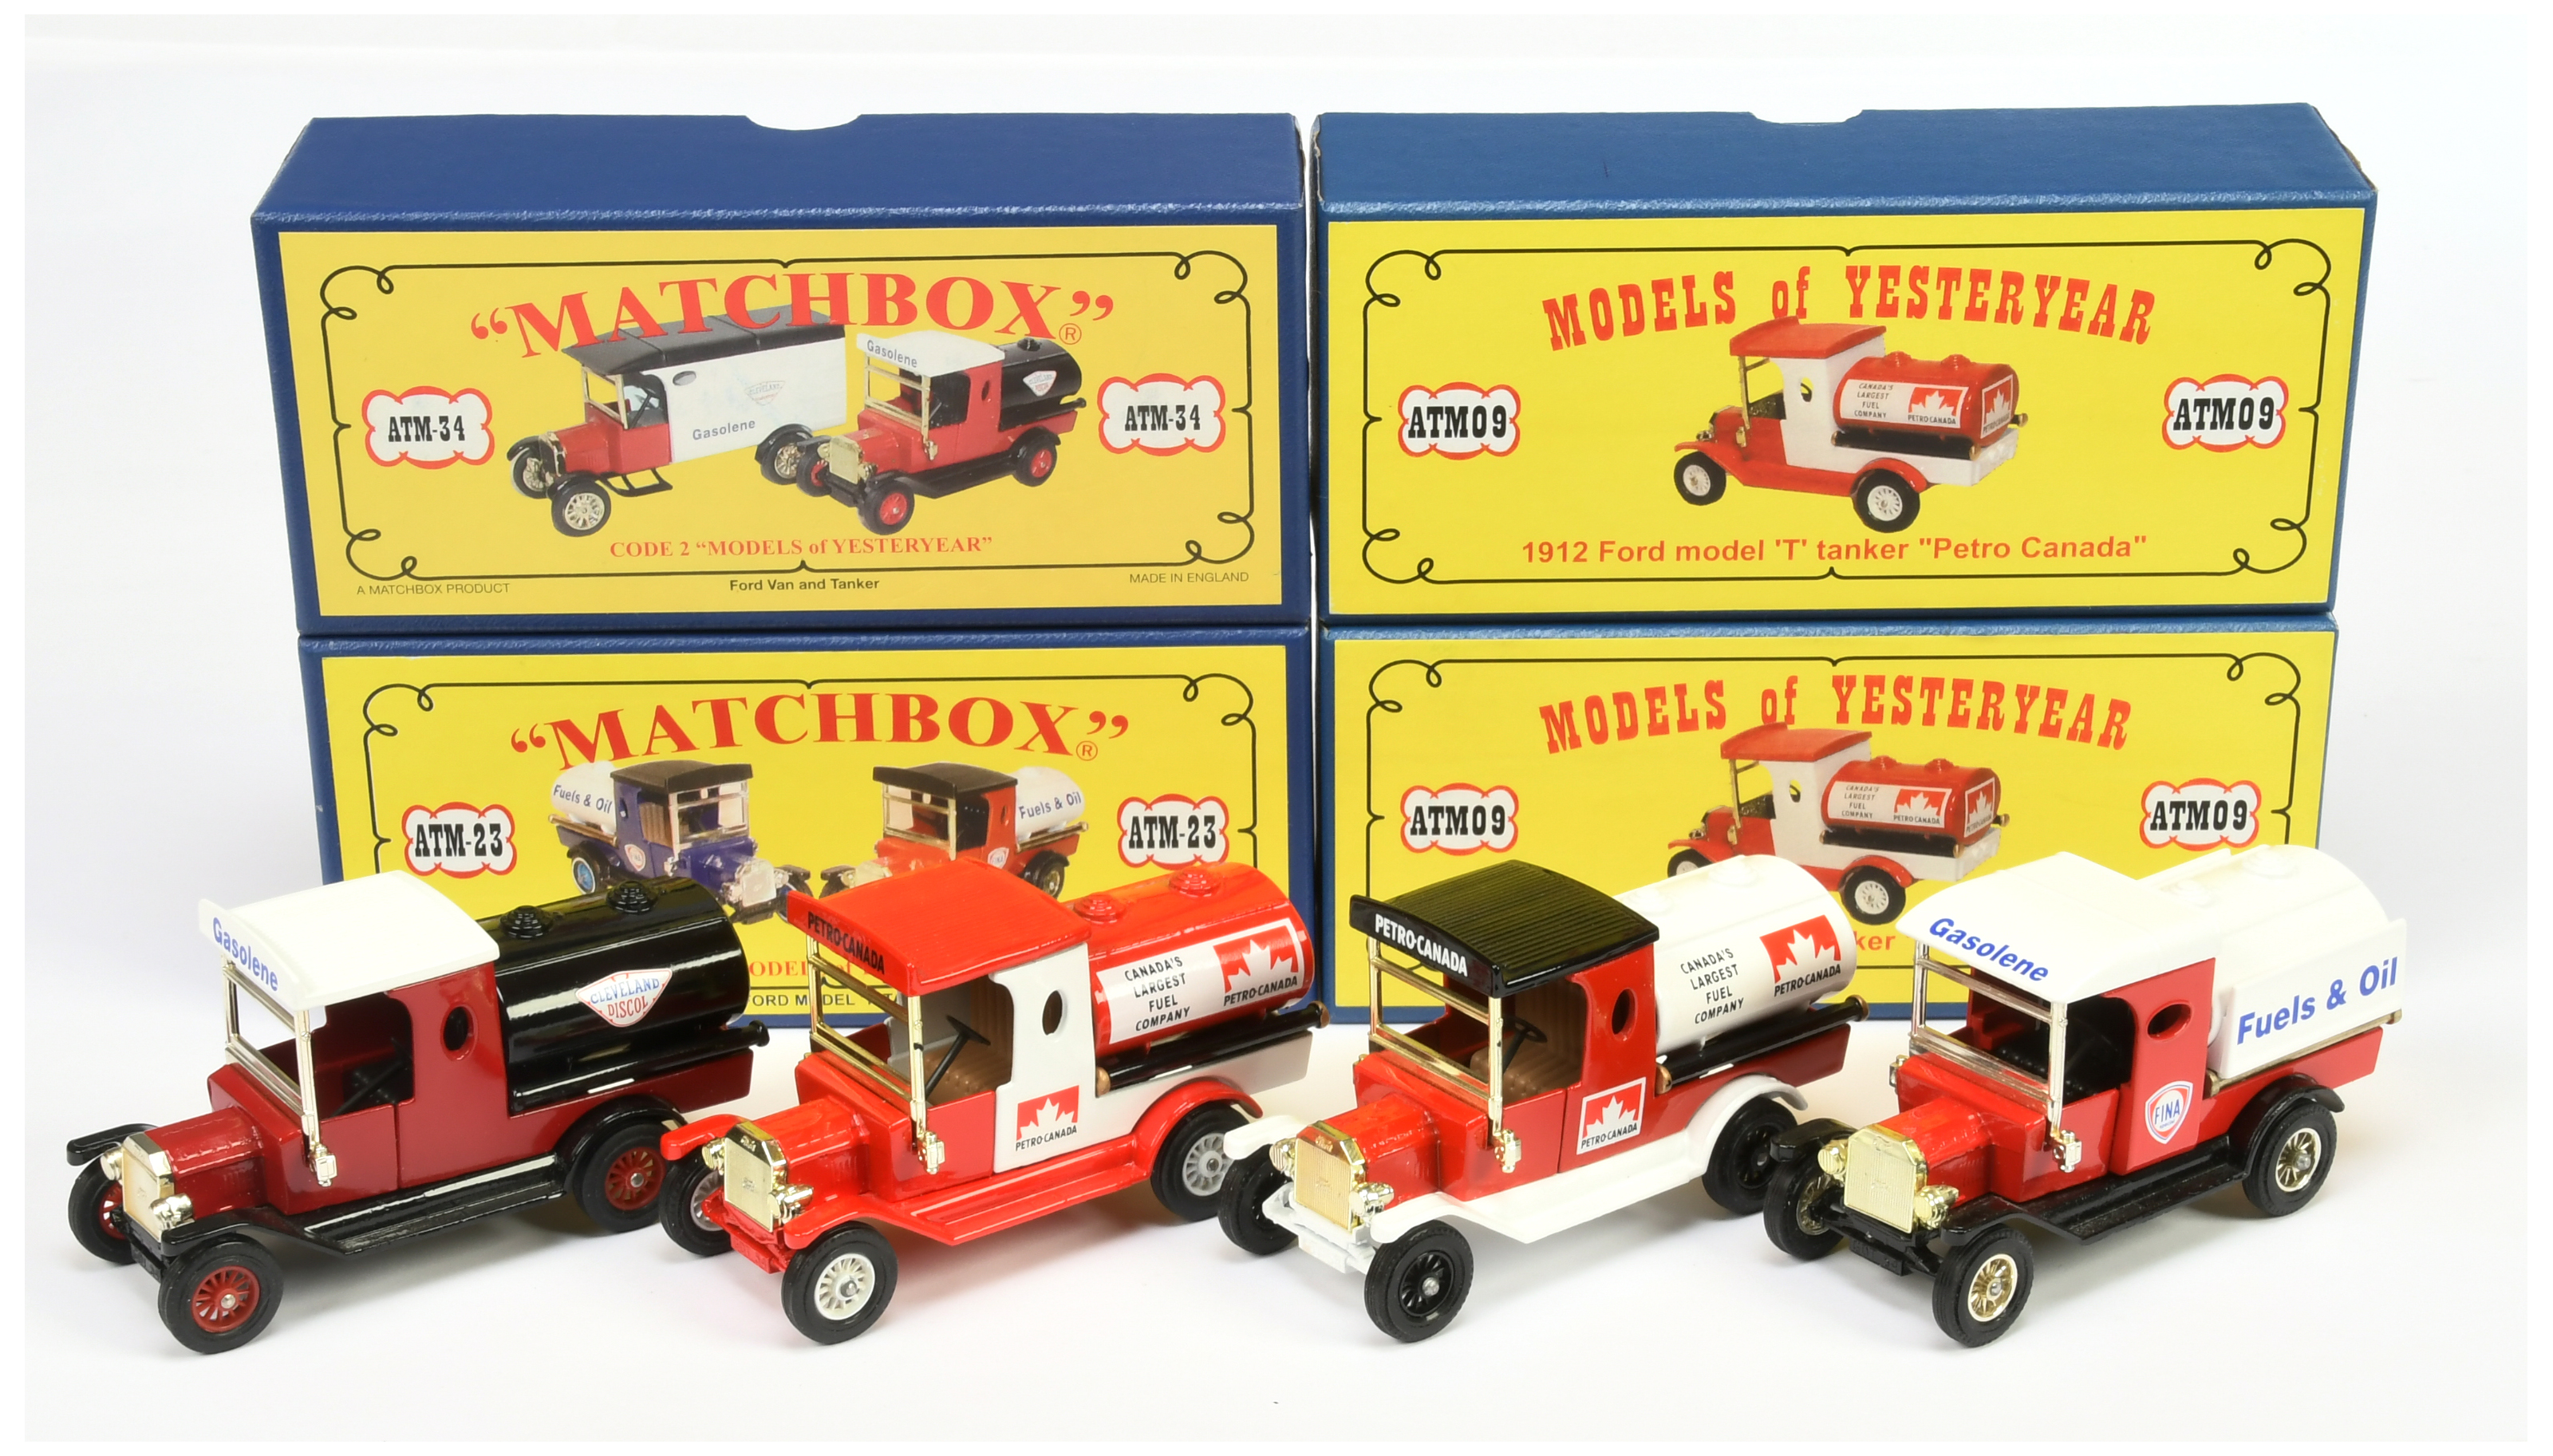 Matchbox Models of Yesteryear Code 2 issues (1) ATM09 1912 Ford Model T Tanker "Petro Canada" - r...